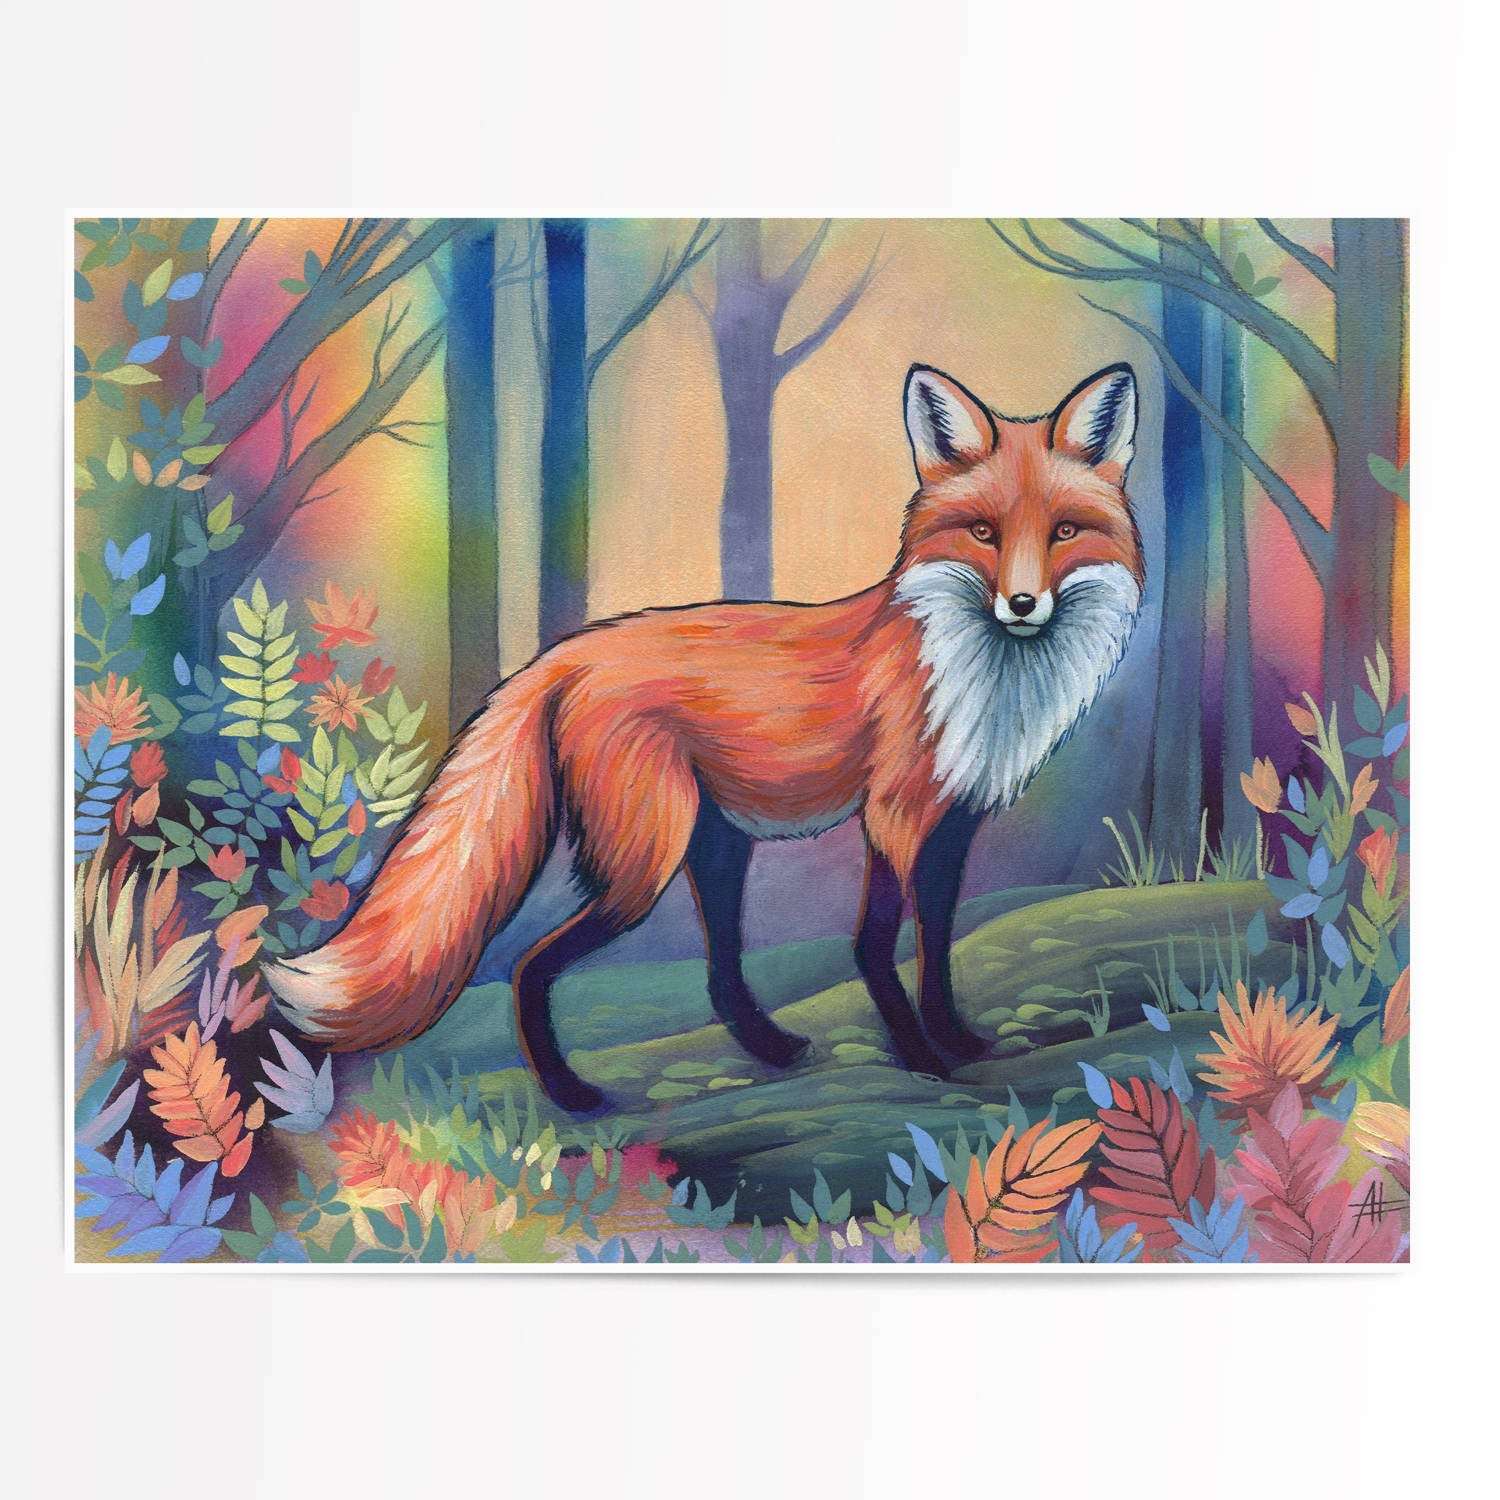 Illustration of a fox standing in a colorful forest with trees and autumn leaves, rendered in vibrant tones and detailed brushwork from the Twilight Watch - Fine Art Print Bundle.